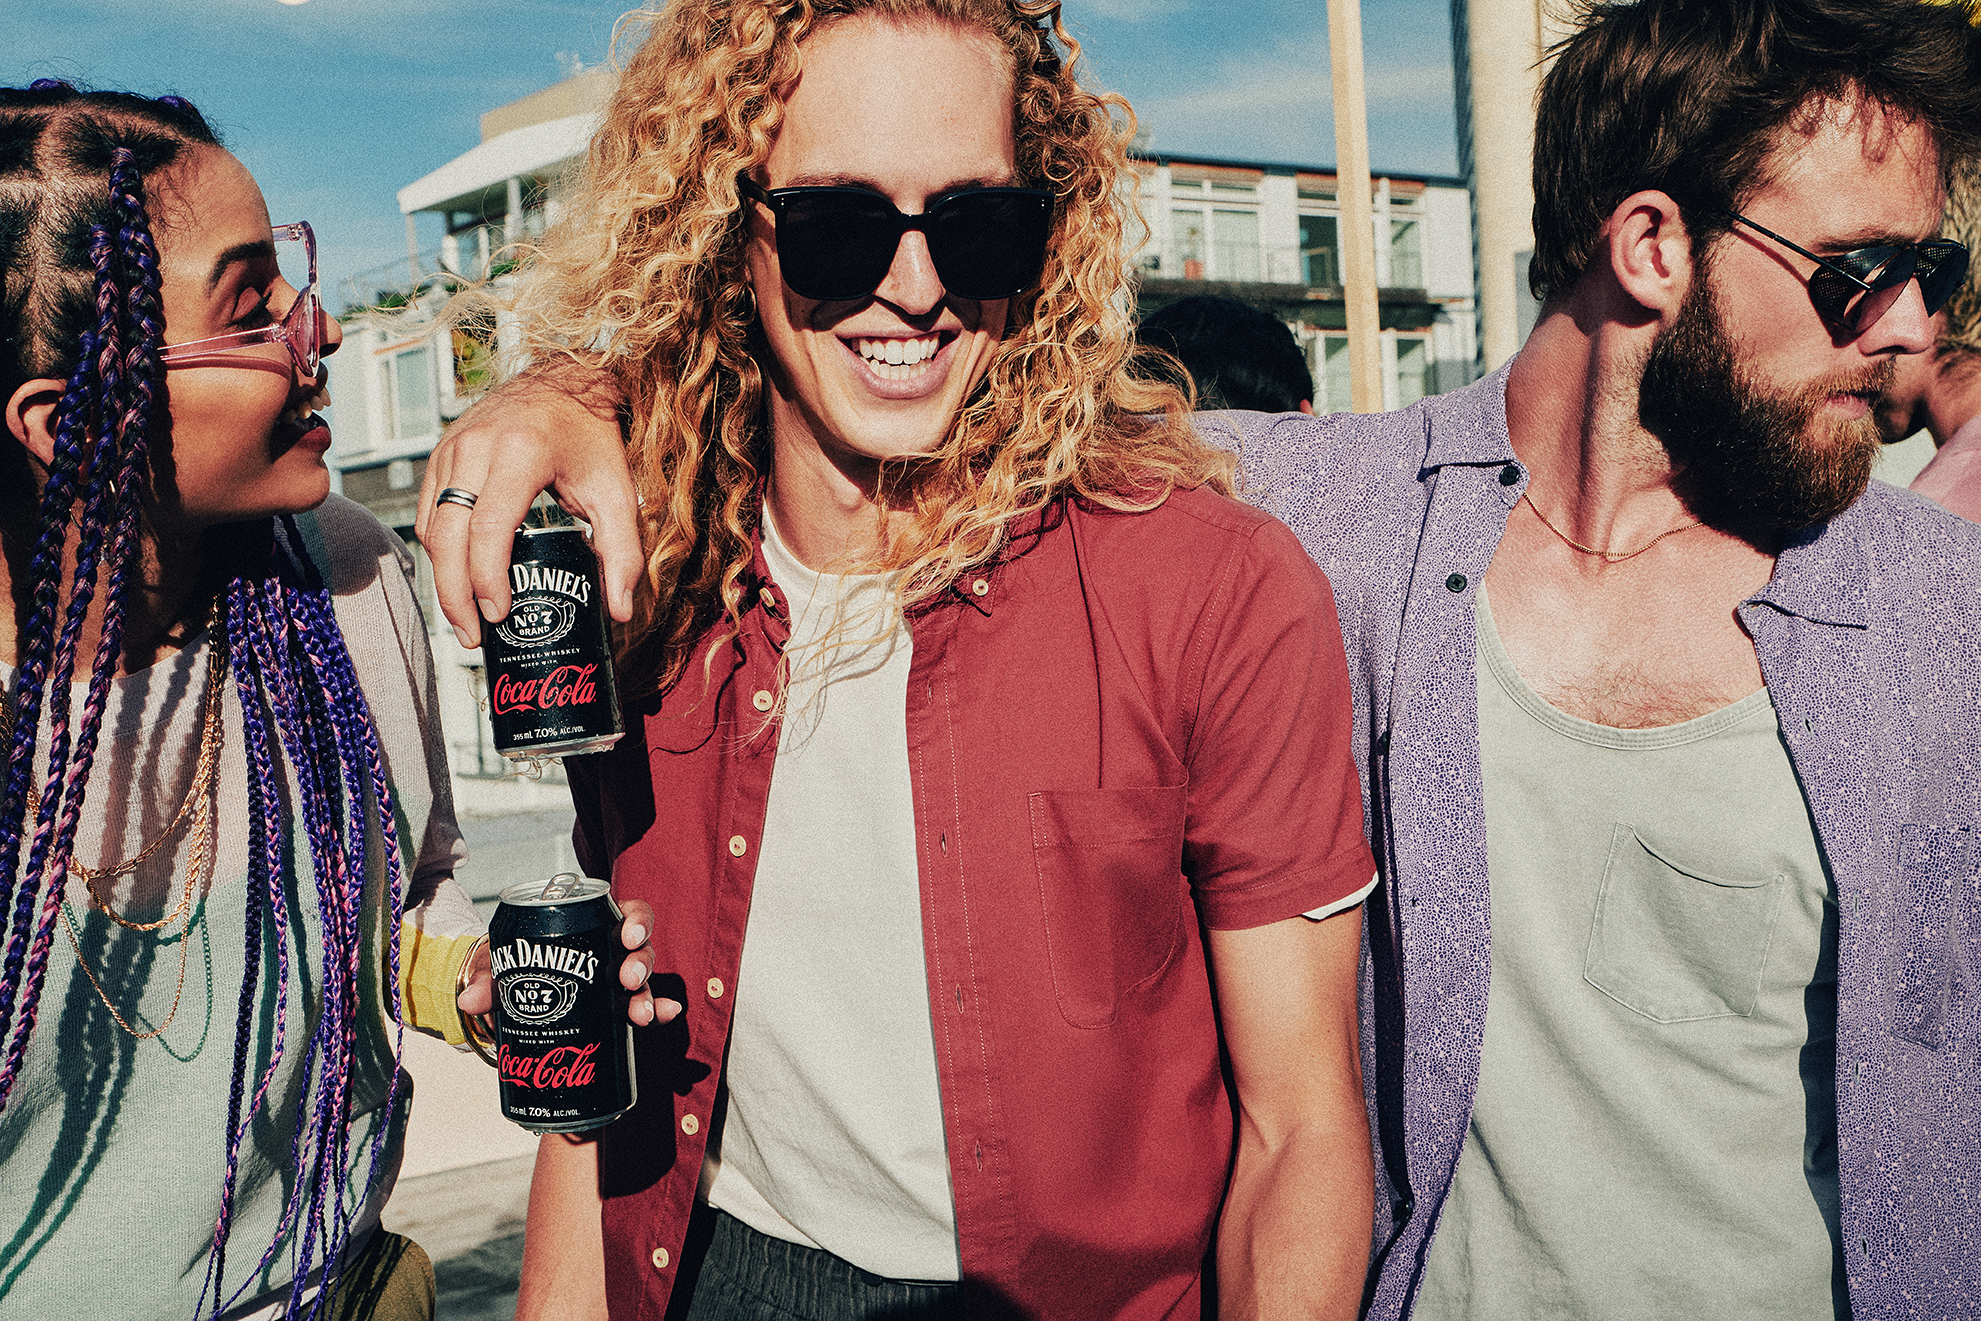 Image of a person in a red button up shirt with a man standing next to them to the right in a purple button up shirt with his arm around them holding a Jack Daniel's and Coca-Cola can. To the left of the person is and african-american woman with purple braids, pink sunglasses and a cream and yellow sweater holding a Jack Daniel's and Coca-Cola can.